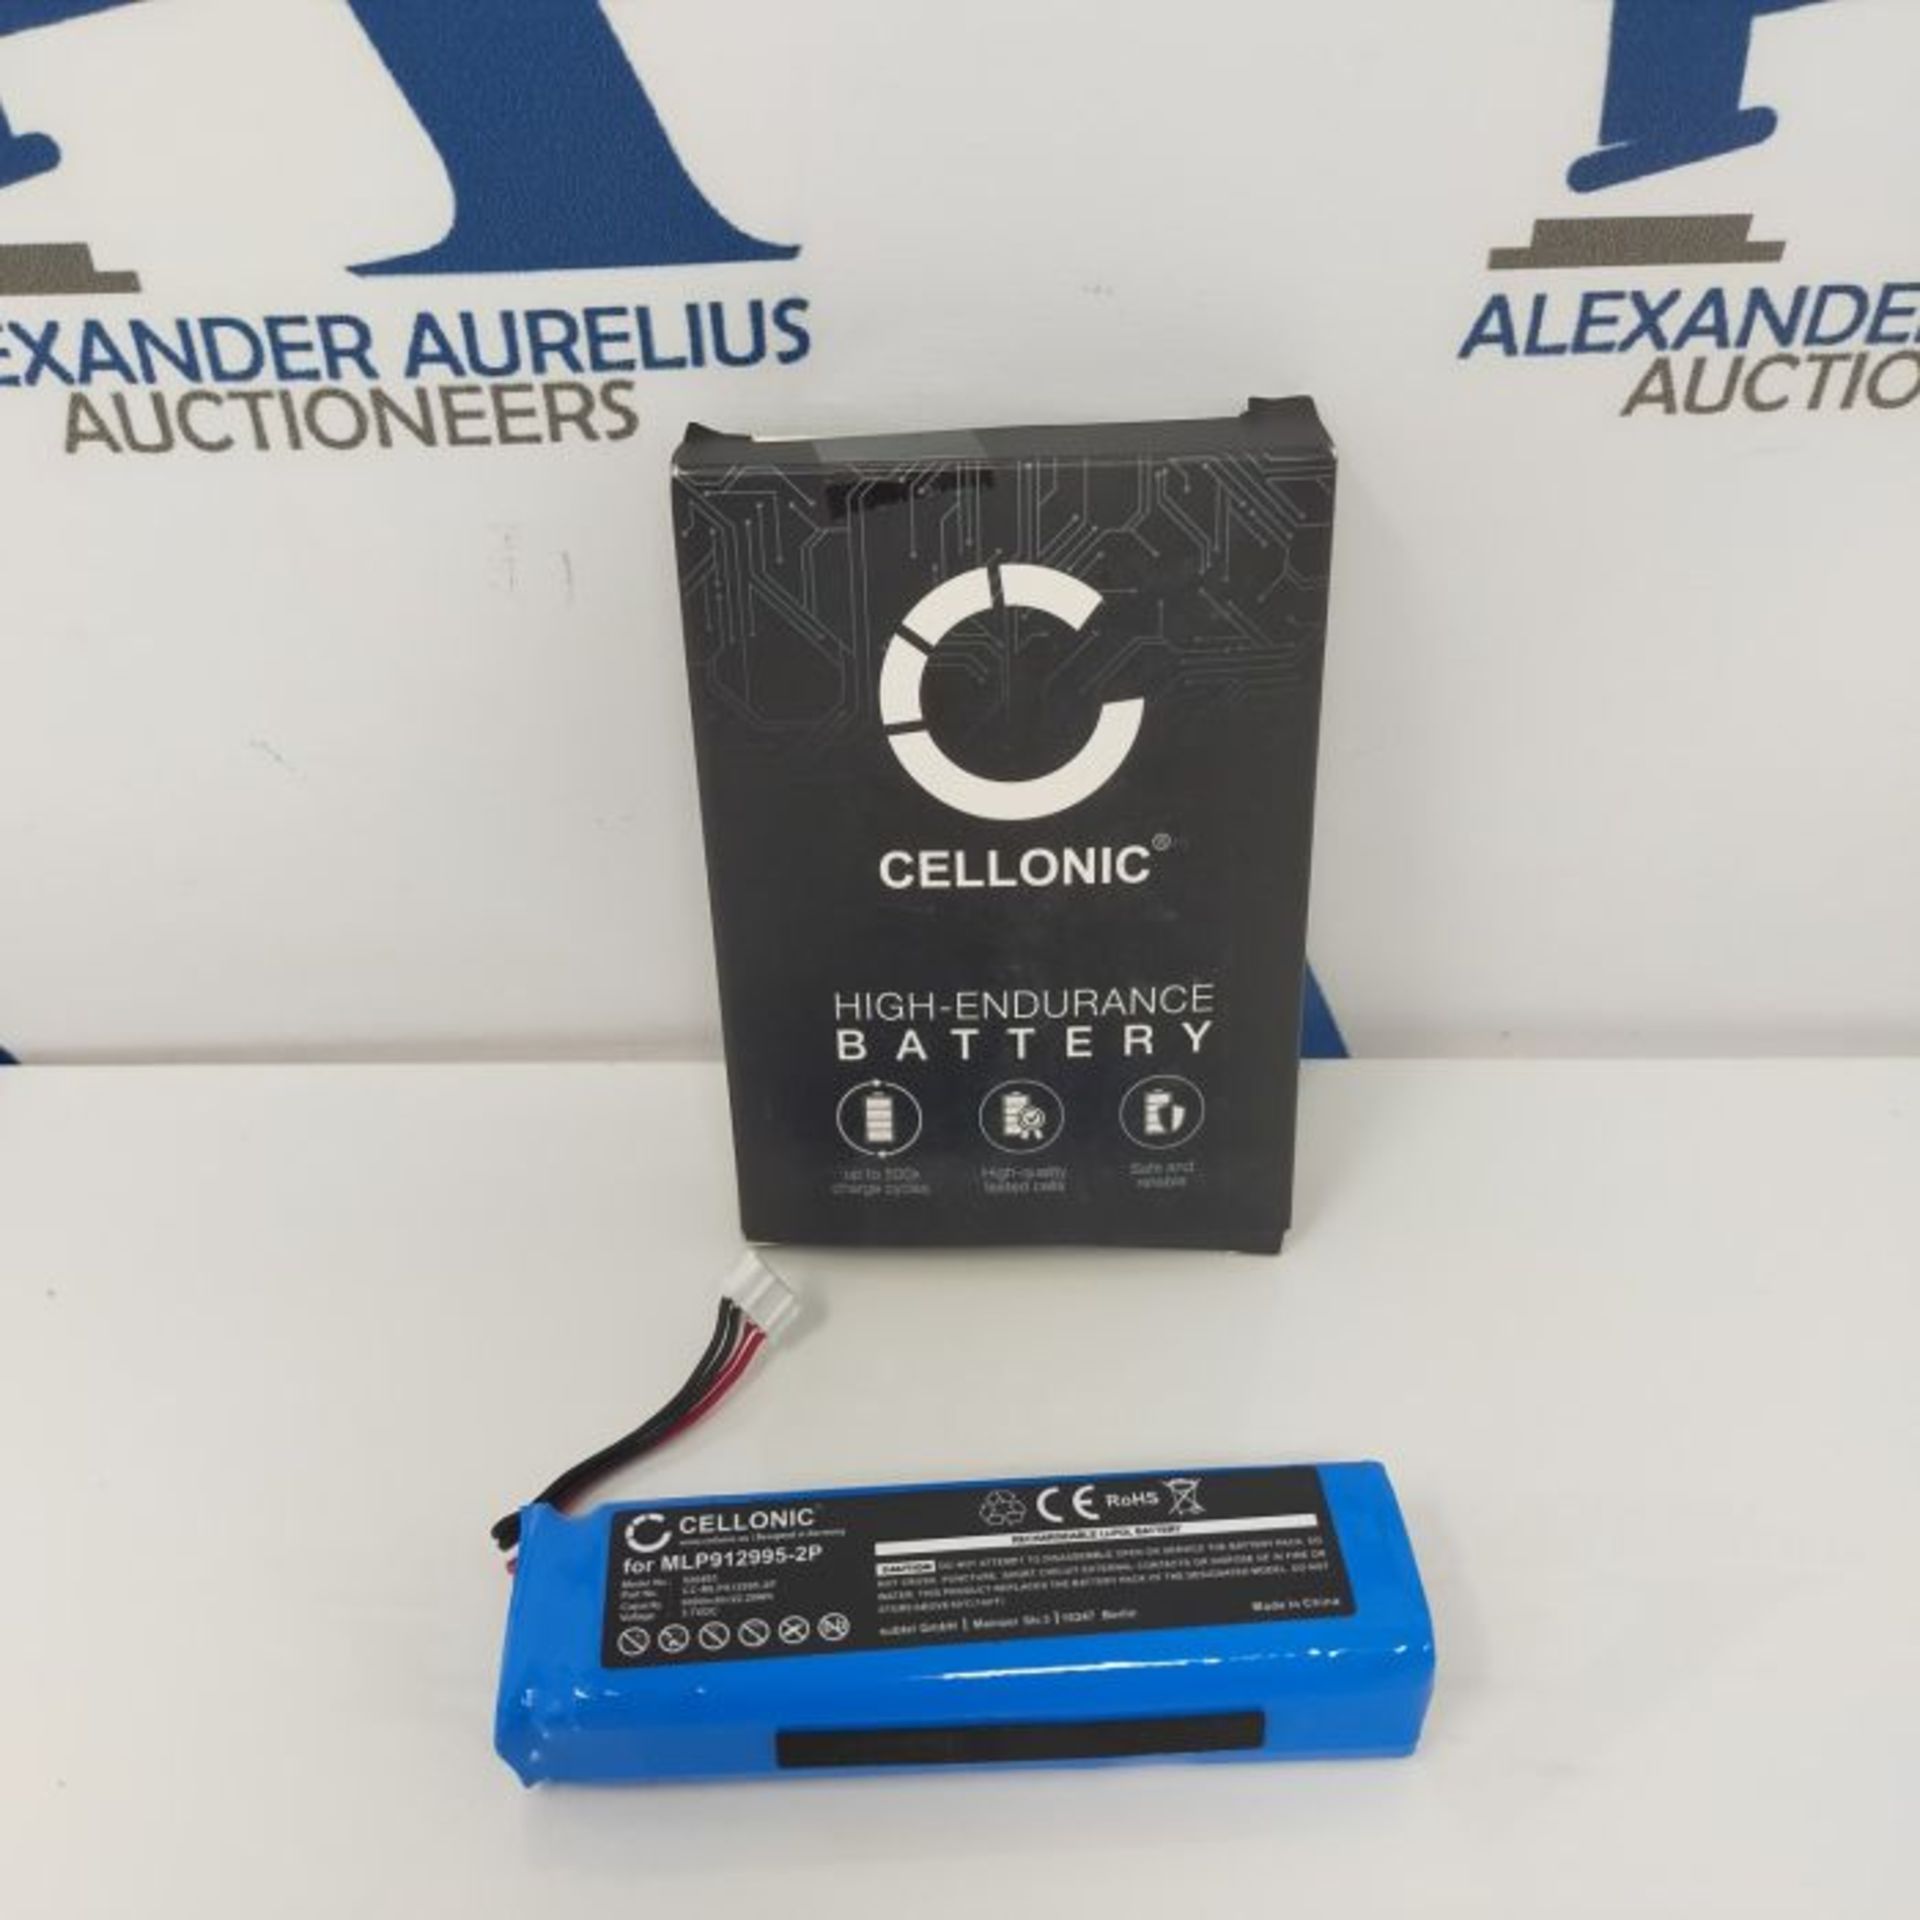 CELLONIC® Battery Replacement for JBL Charge 2+, 2 plus, 2 + Portable Bluetooth Speak - Image 2 of 3